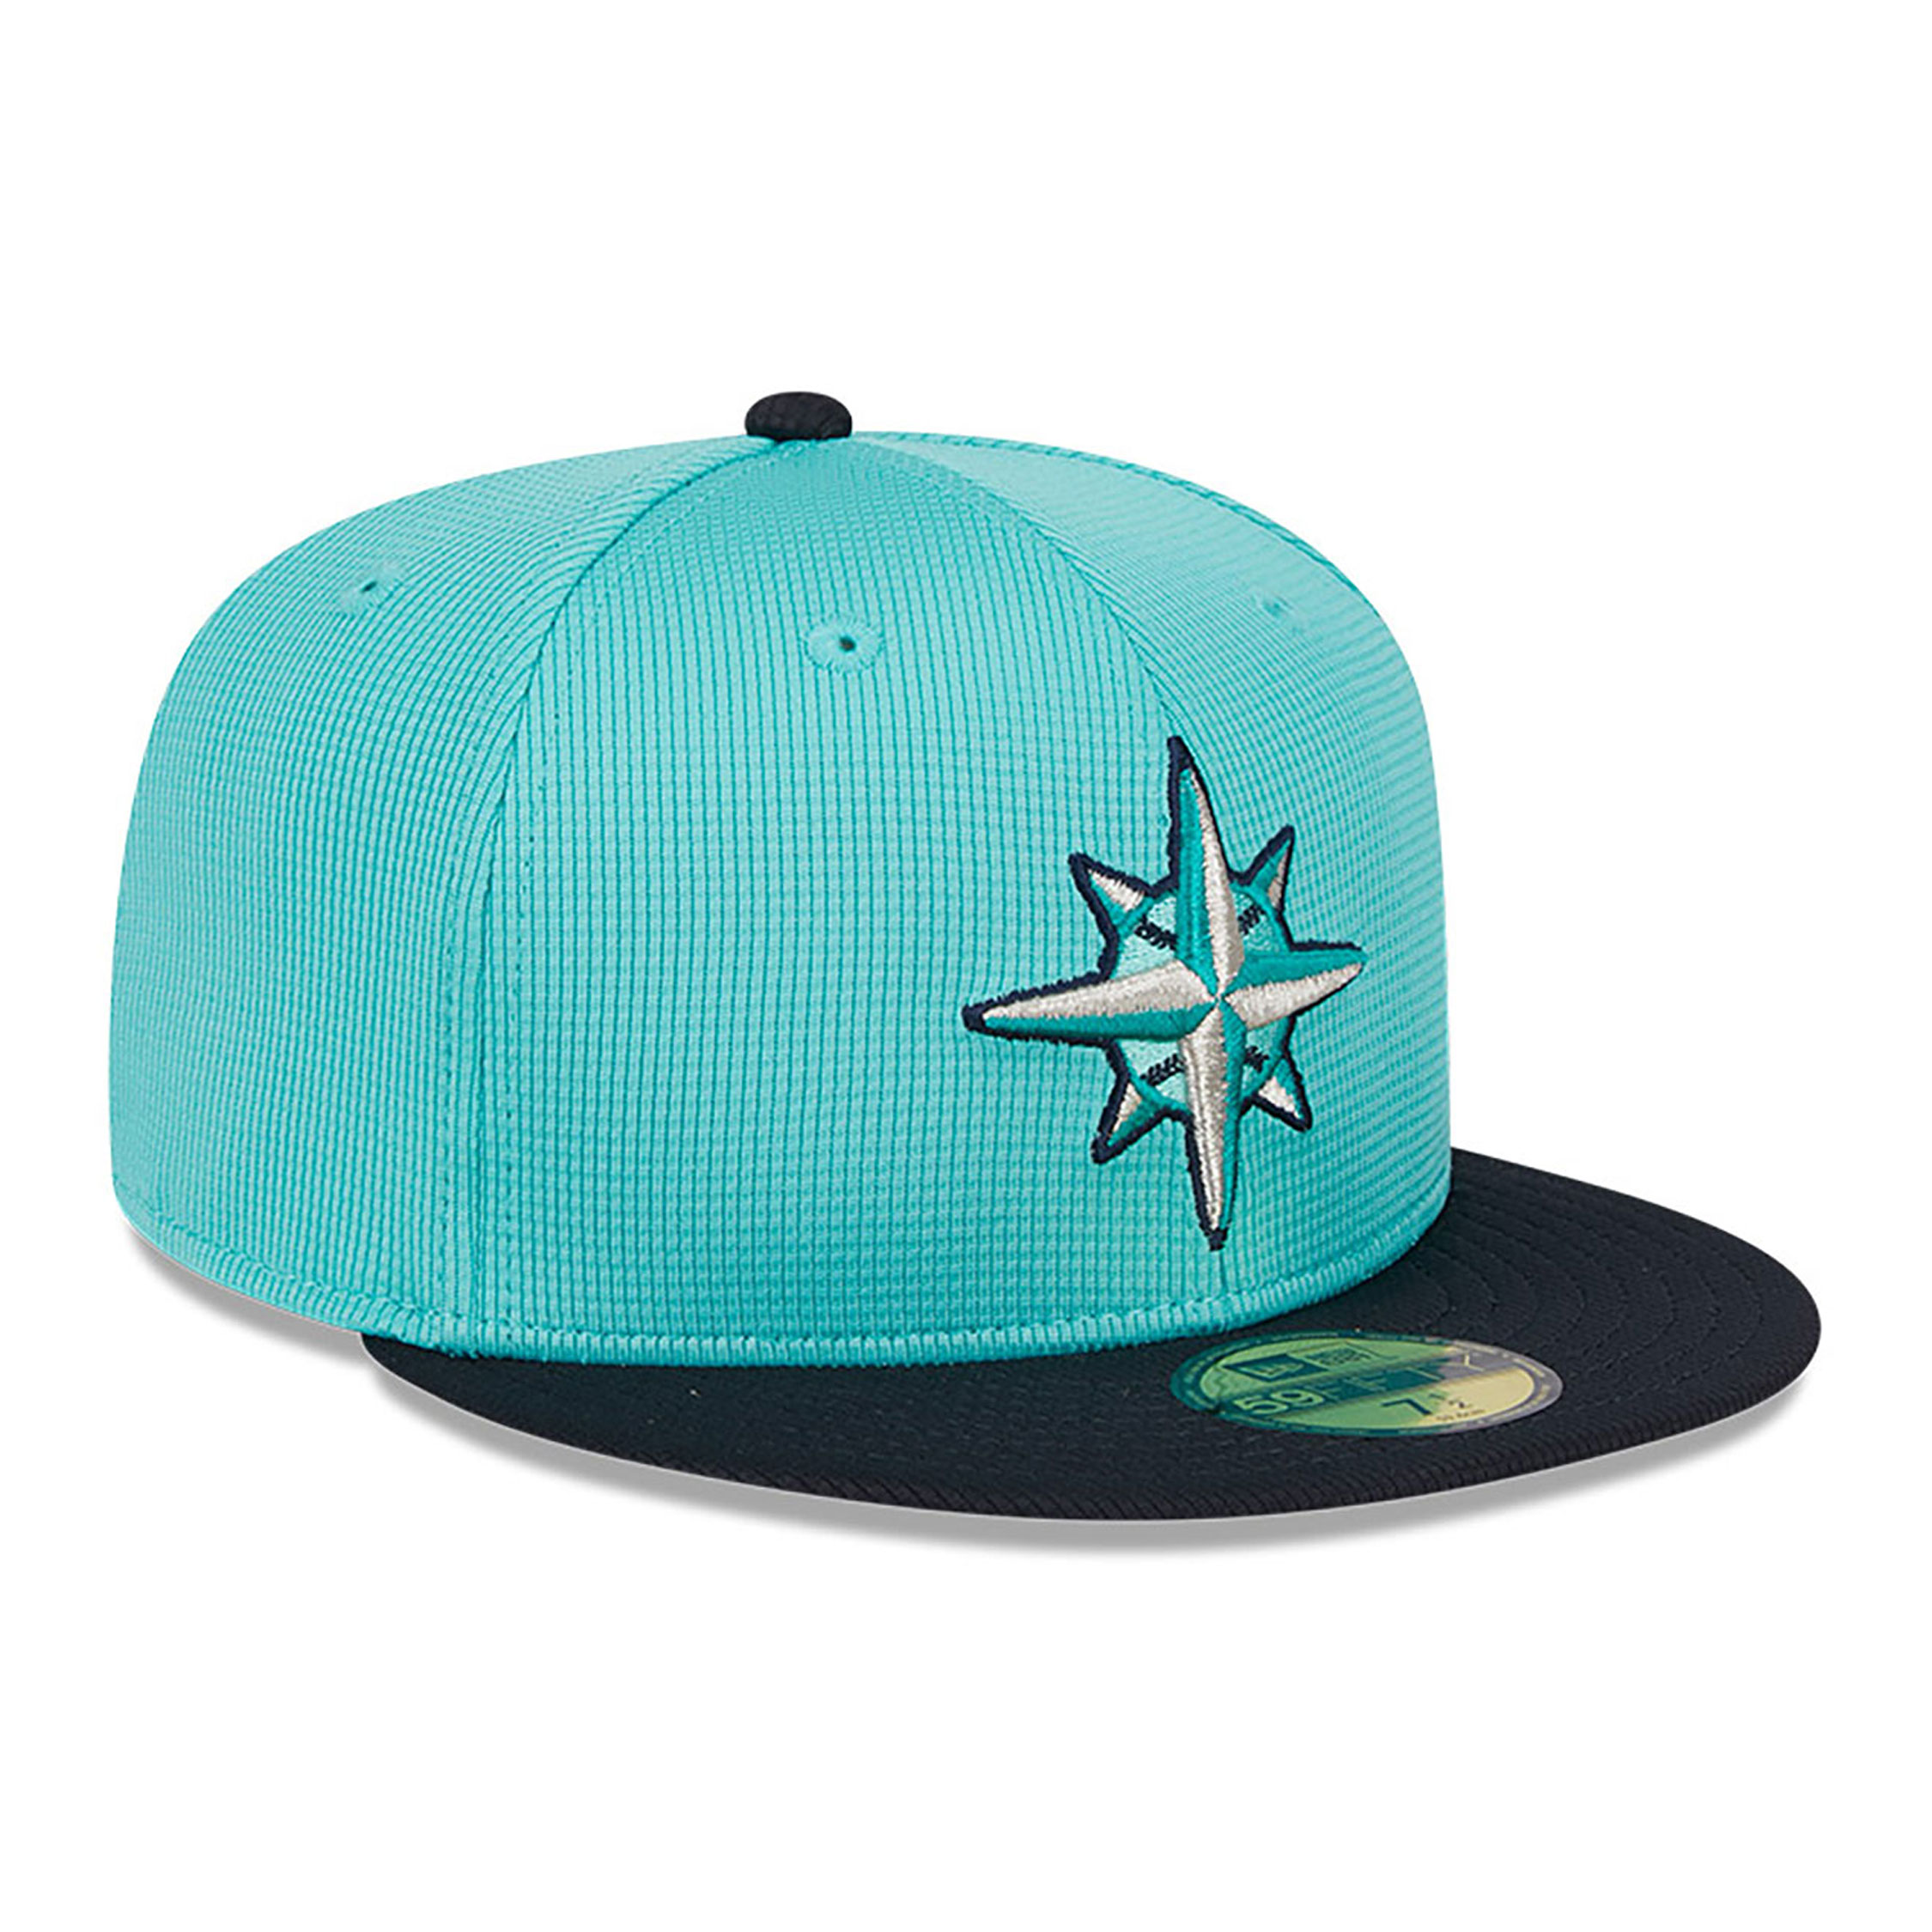 Seattle Mariners Spring Training Turquoise 59FIFTY Fitted Cap